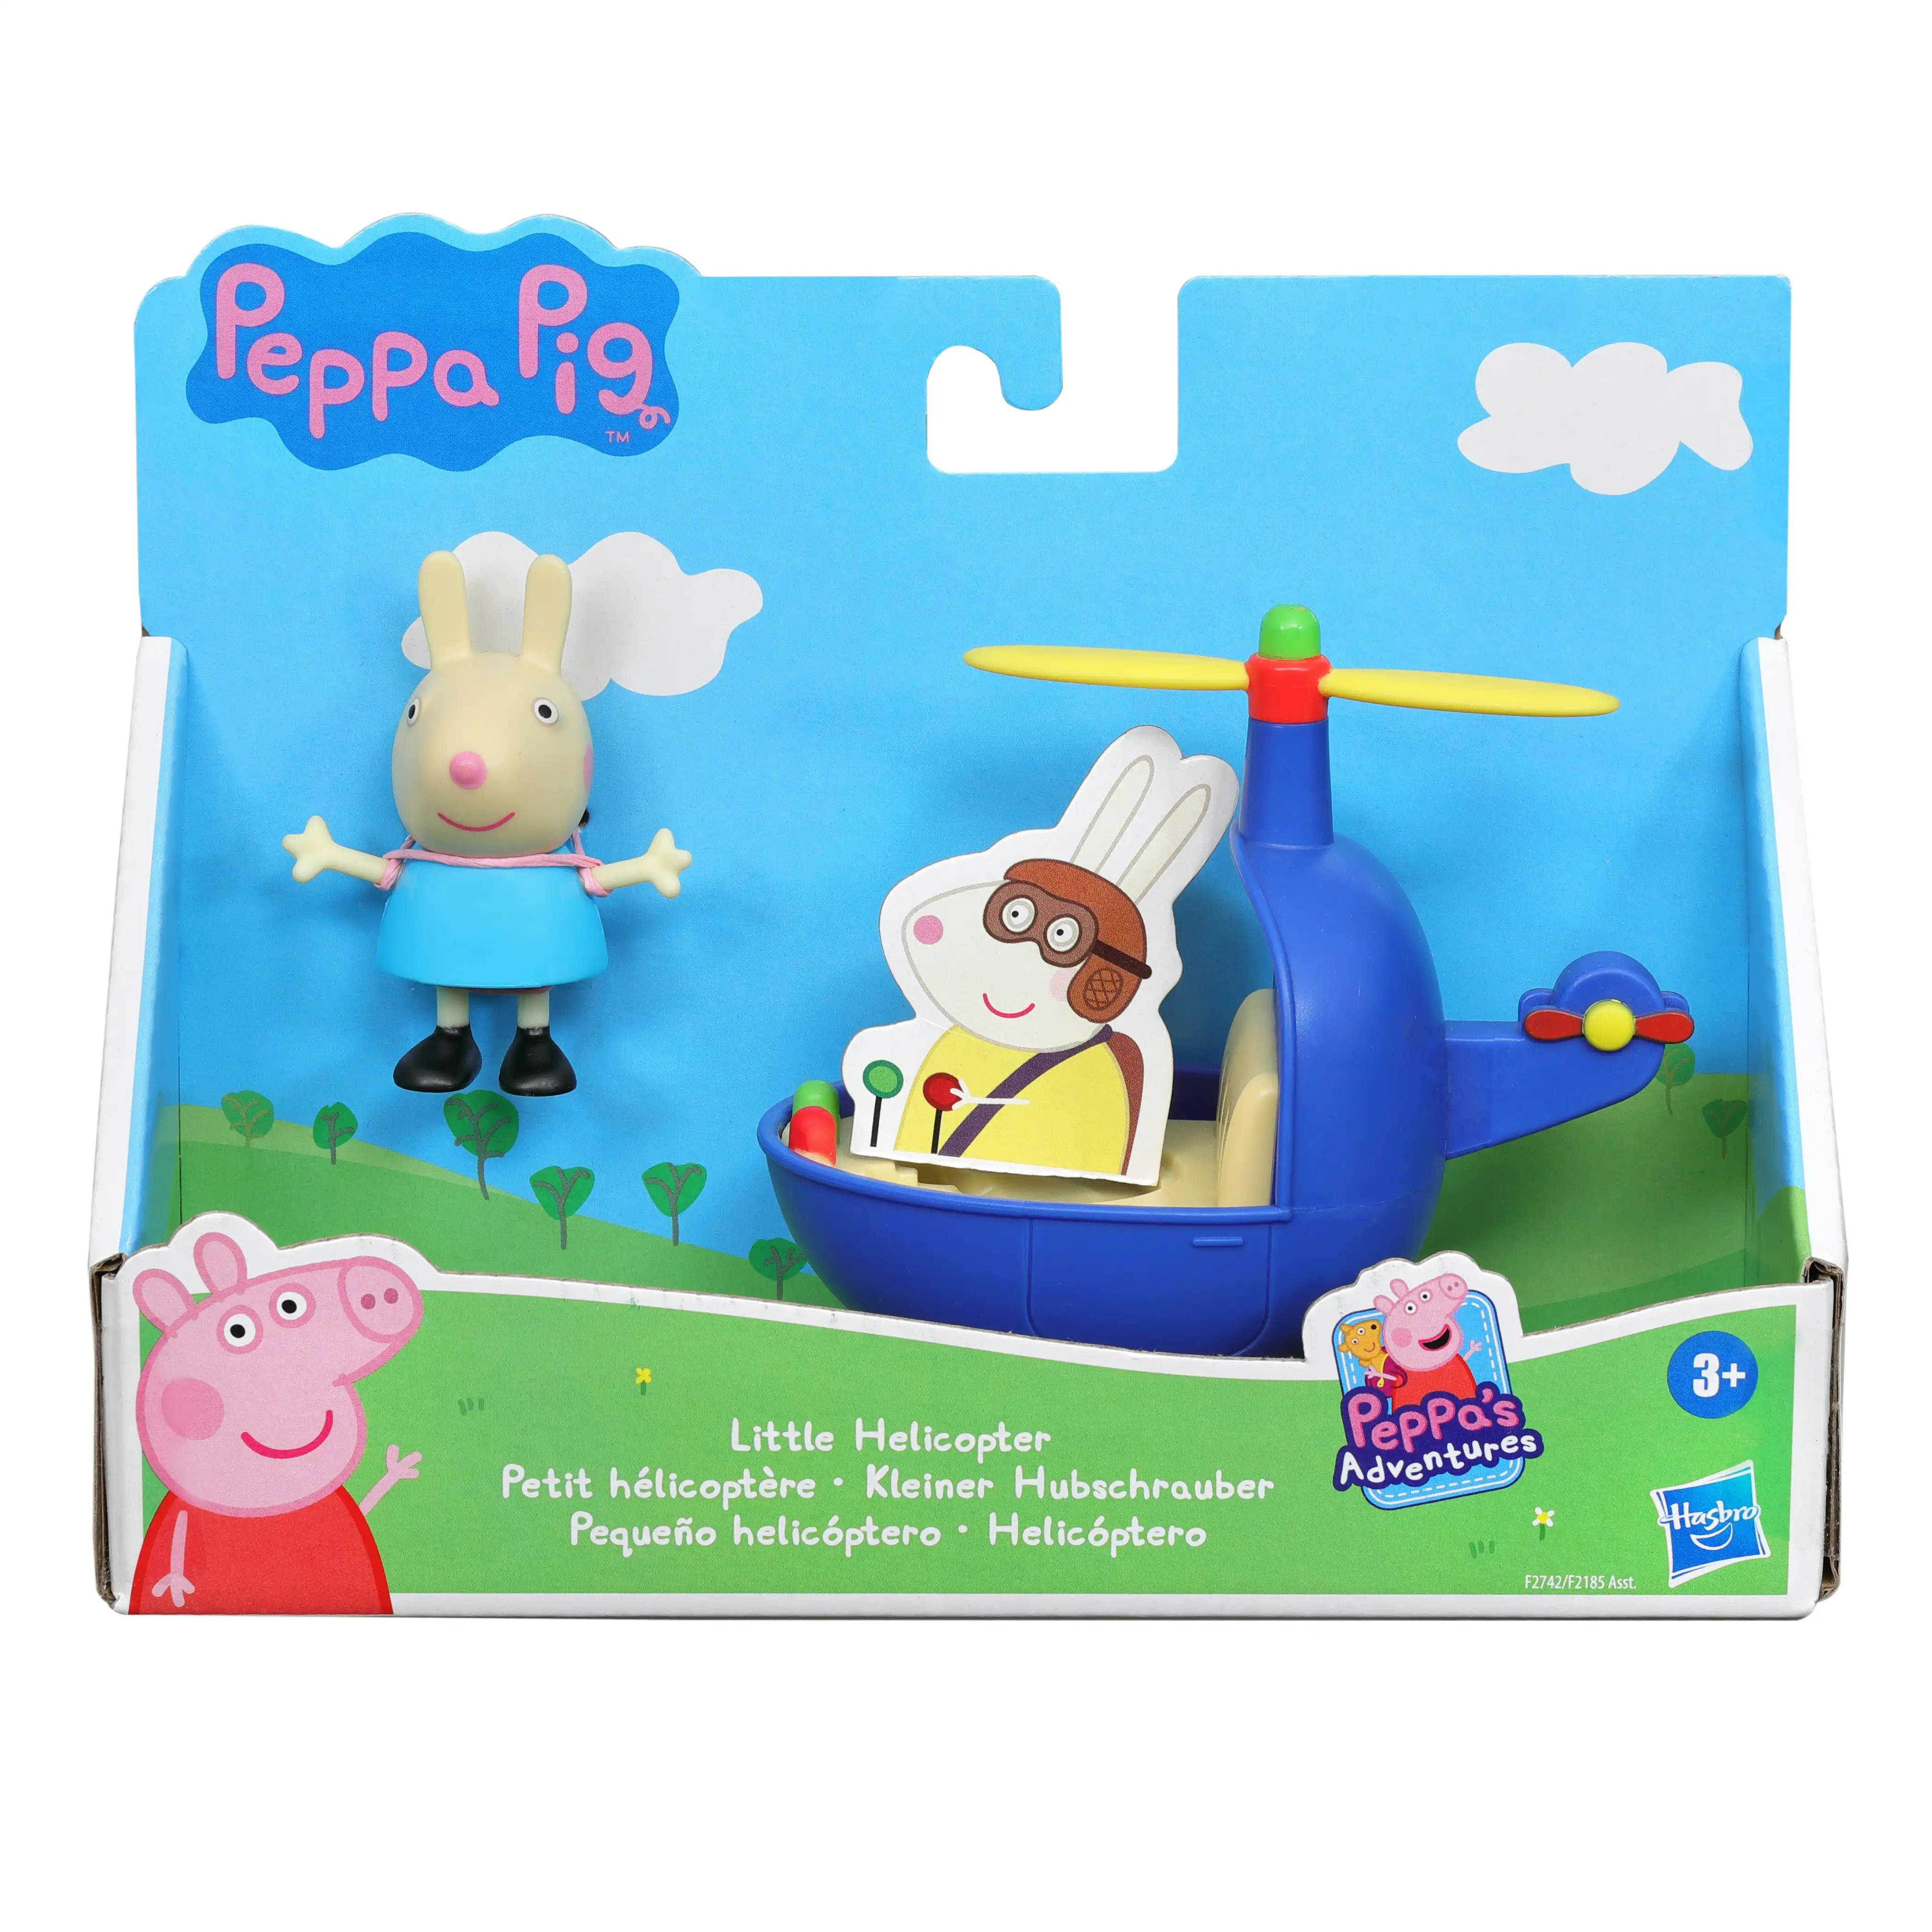 Peppa Pig Little Helicopter